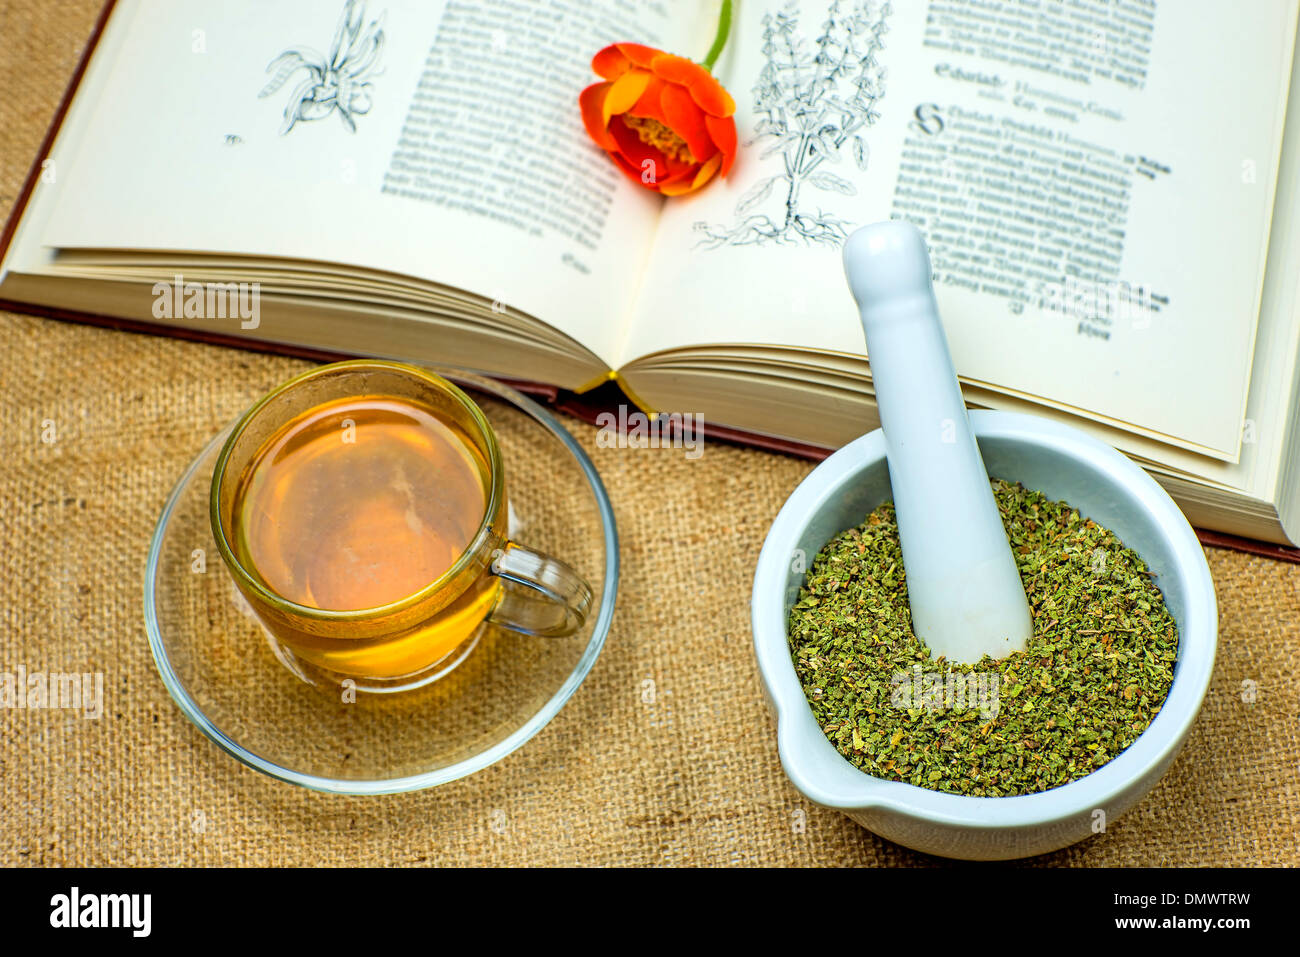 Rock rose tea with medieval textbook Stock Photo